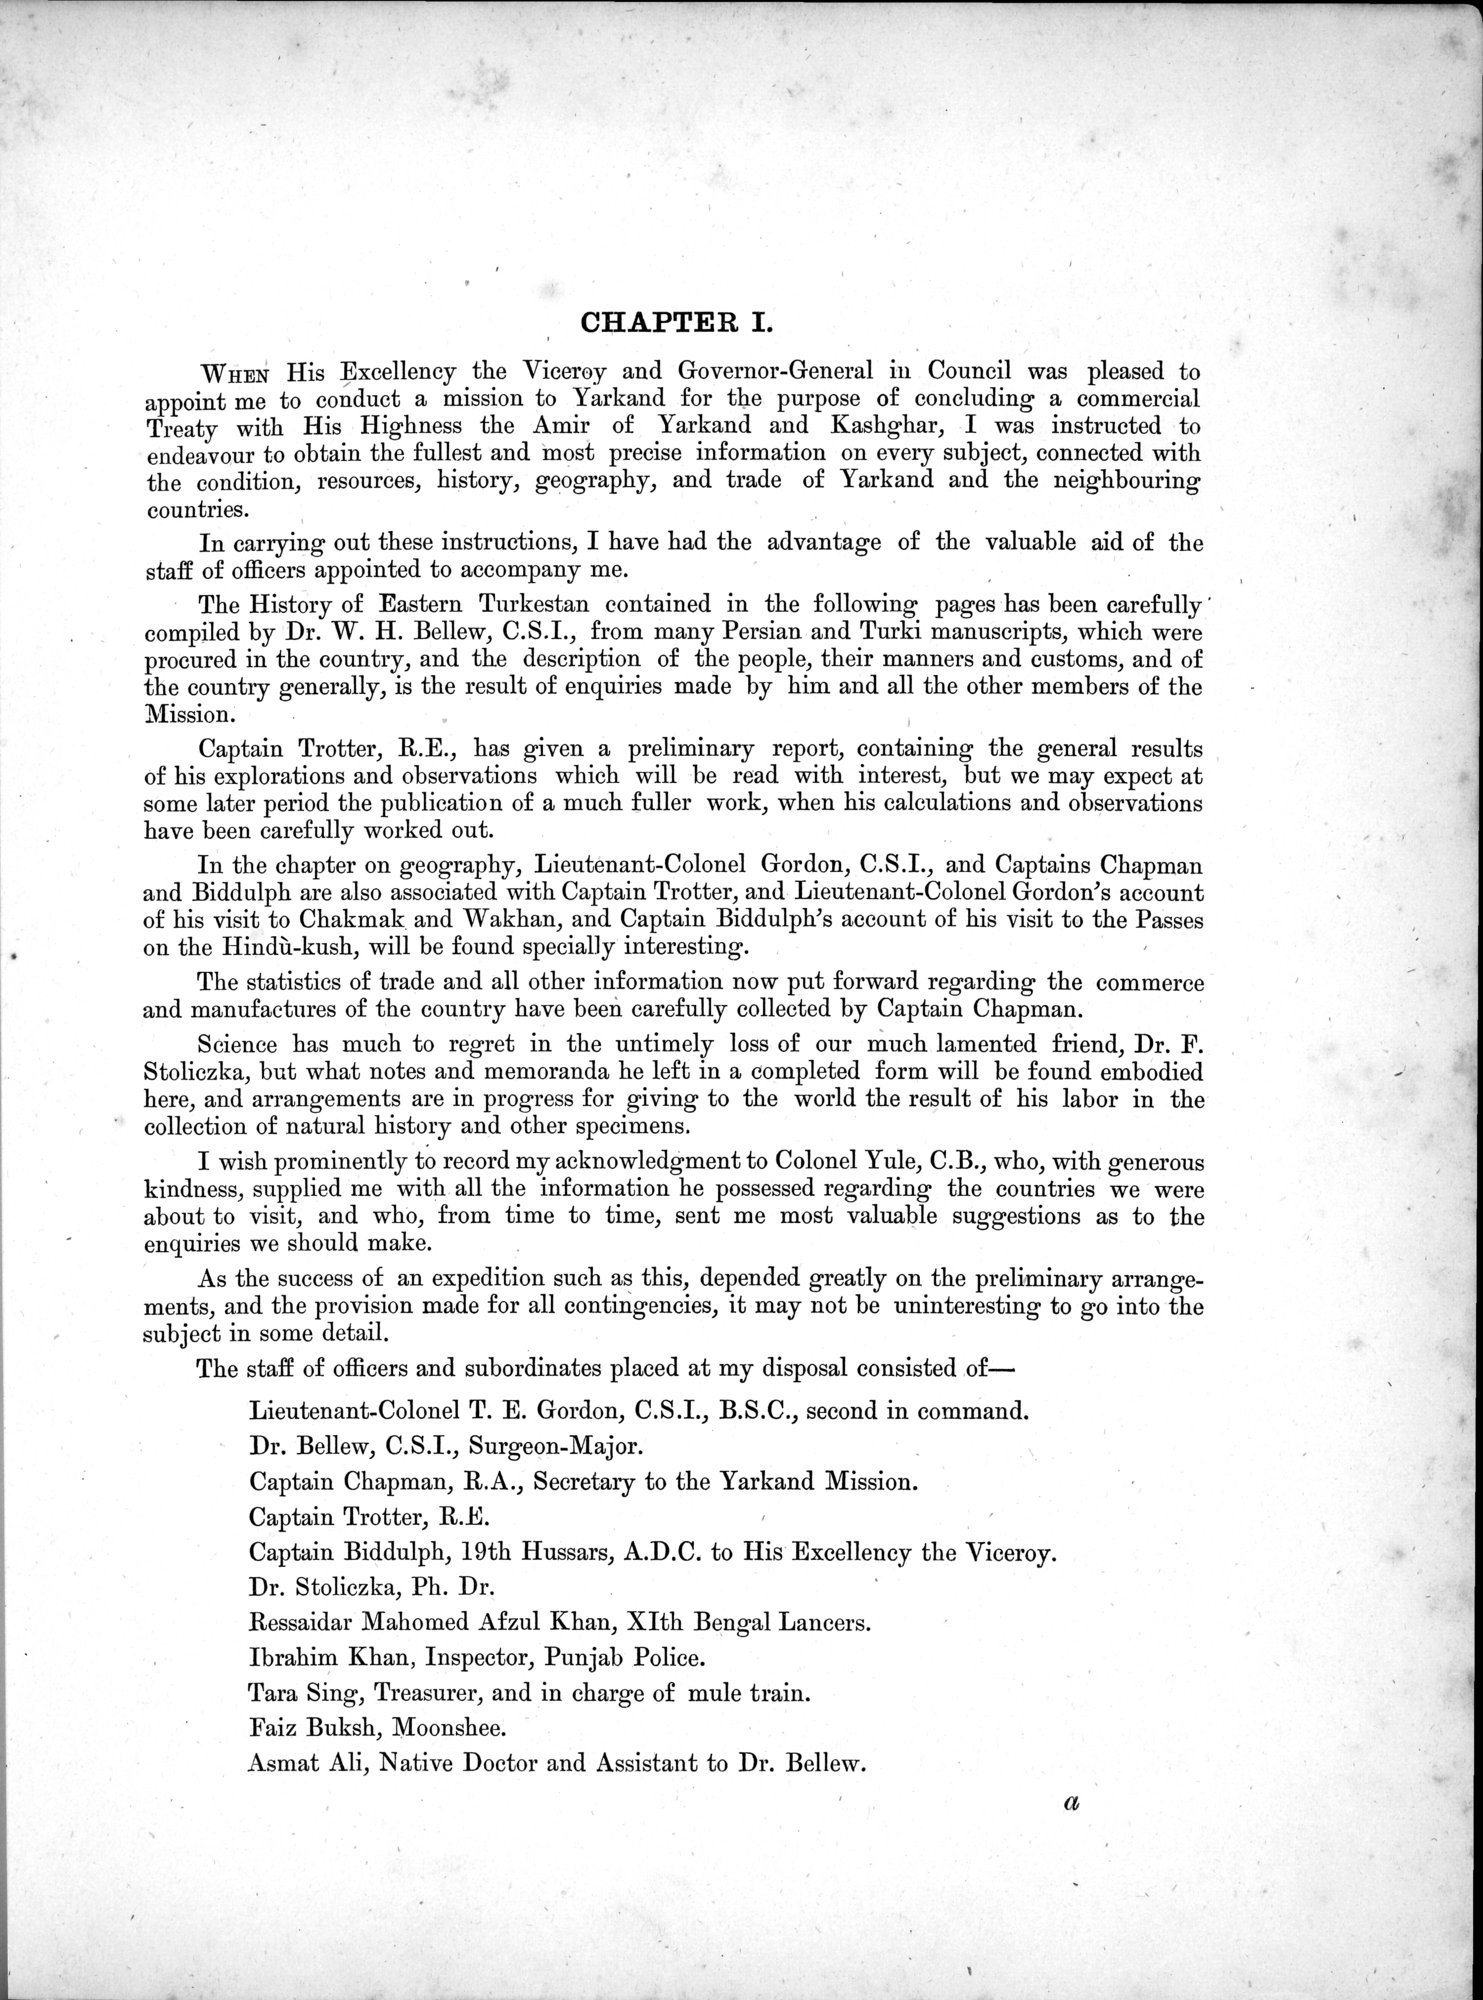 Report of a Mission to Yarkund in 1873 : vol.1 / Page 21 (Grayscale High Resolution Image)